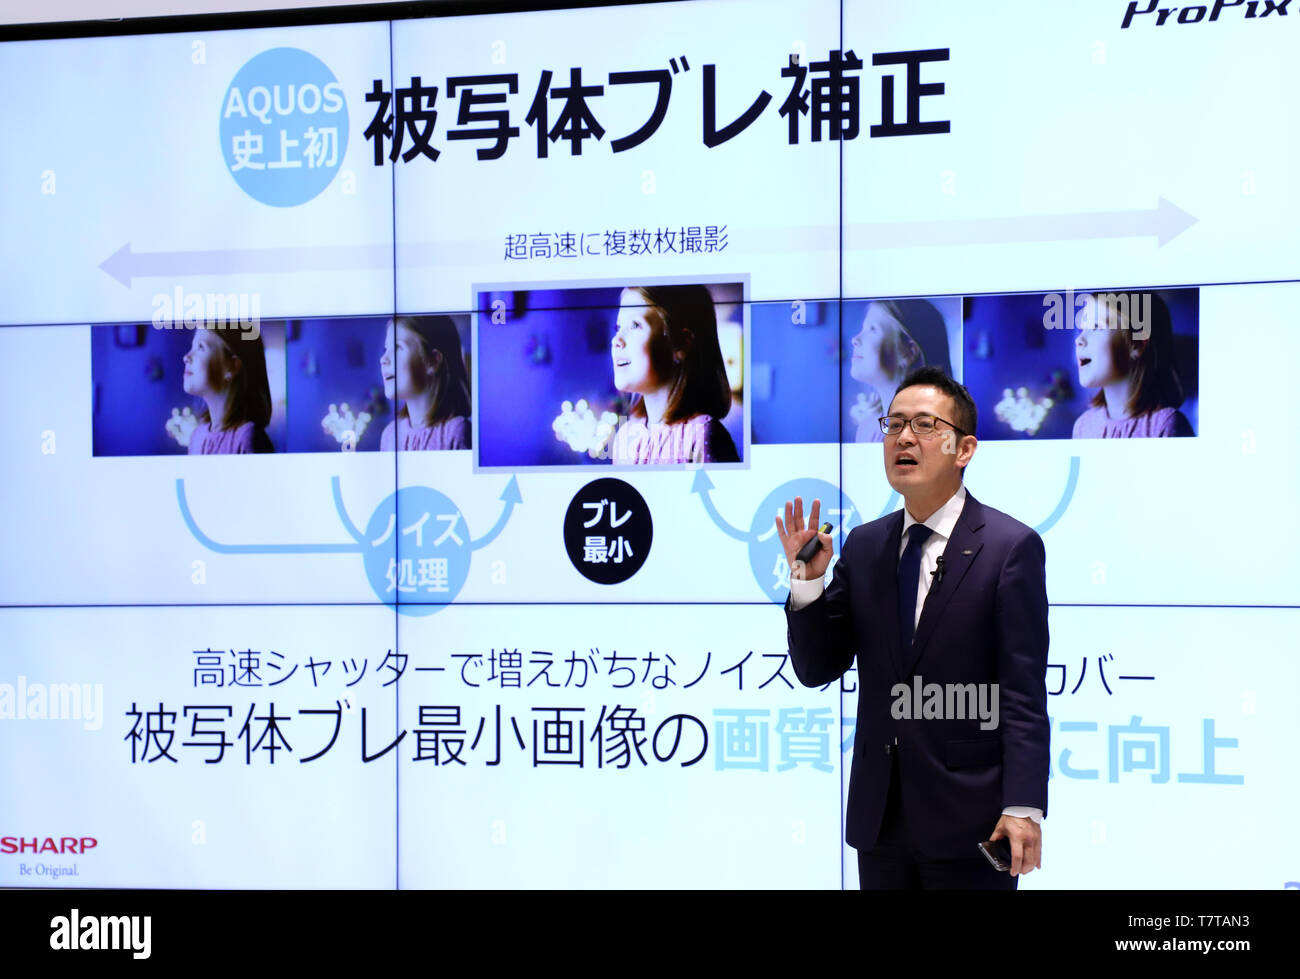 Tokyo, Japan. 8th May, 2019. Japanese electronics giant Sharp mobile communication business unit general manager Shigeru Kobayashi introduces the company's new smart phone 'AQUOS R3' which will go on sale this summer at the company's Tokyo office on Wednesday, May 8, 2019. The new AQUOS smart phone has newly developed 6.2-inch sized IGZO LCD on its display which can reproduce 1 billion color images. Credit: Yoshio Tsunoda/AFLO/Alamy Live News Stock Photo